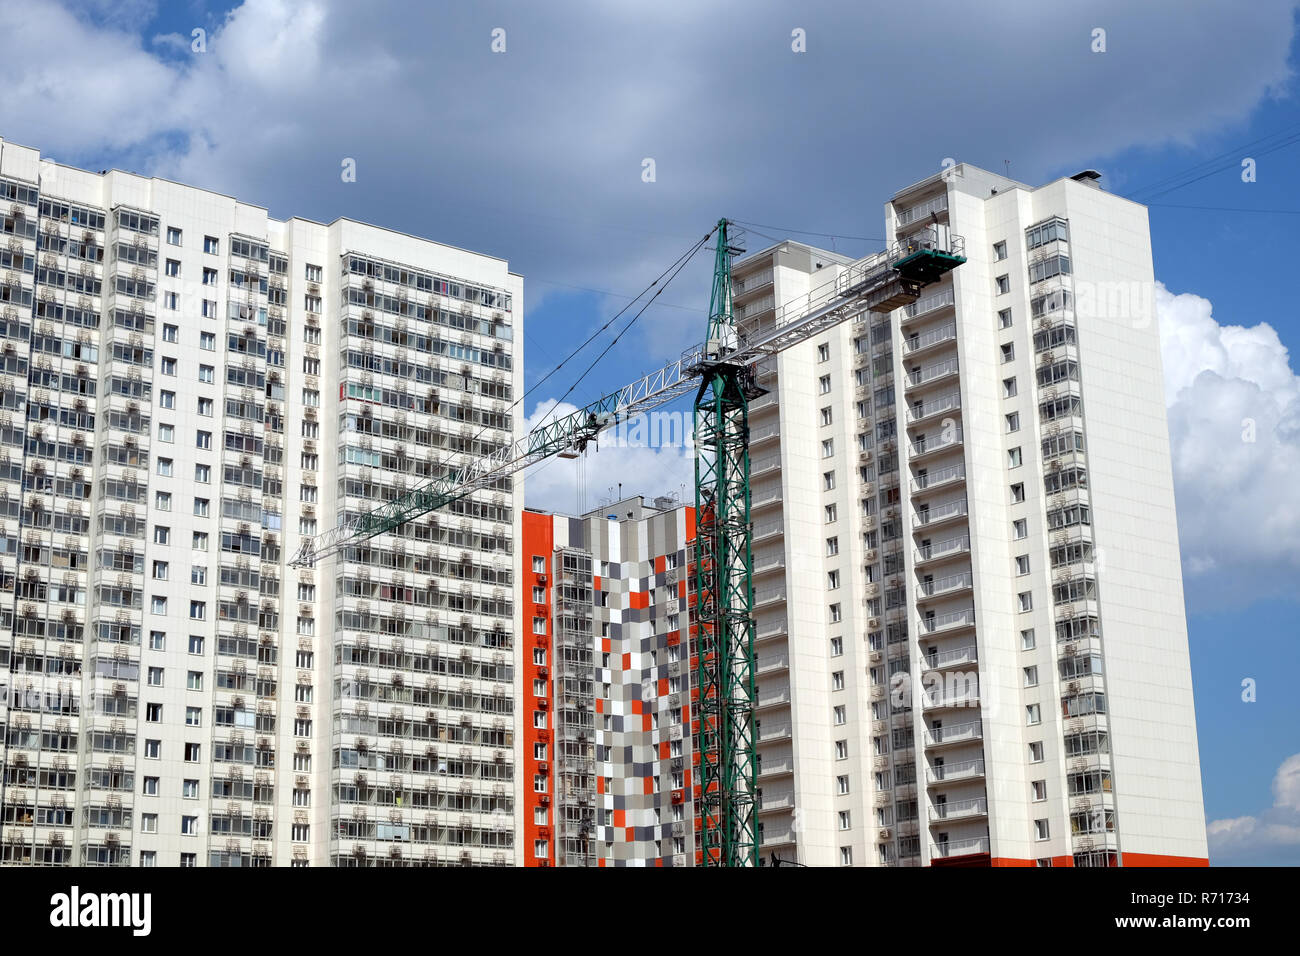 New high-rise modern apartment buildings construction in process ob bright sunny day front view horizontal with focus on construction tower crane Stock Photo